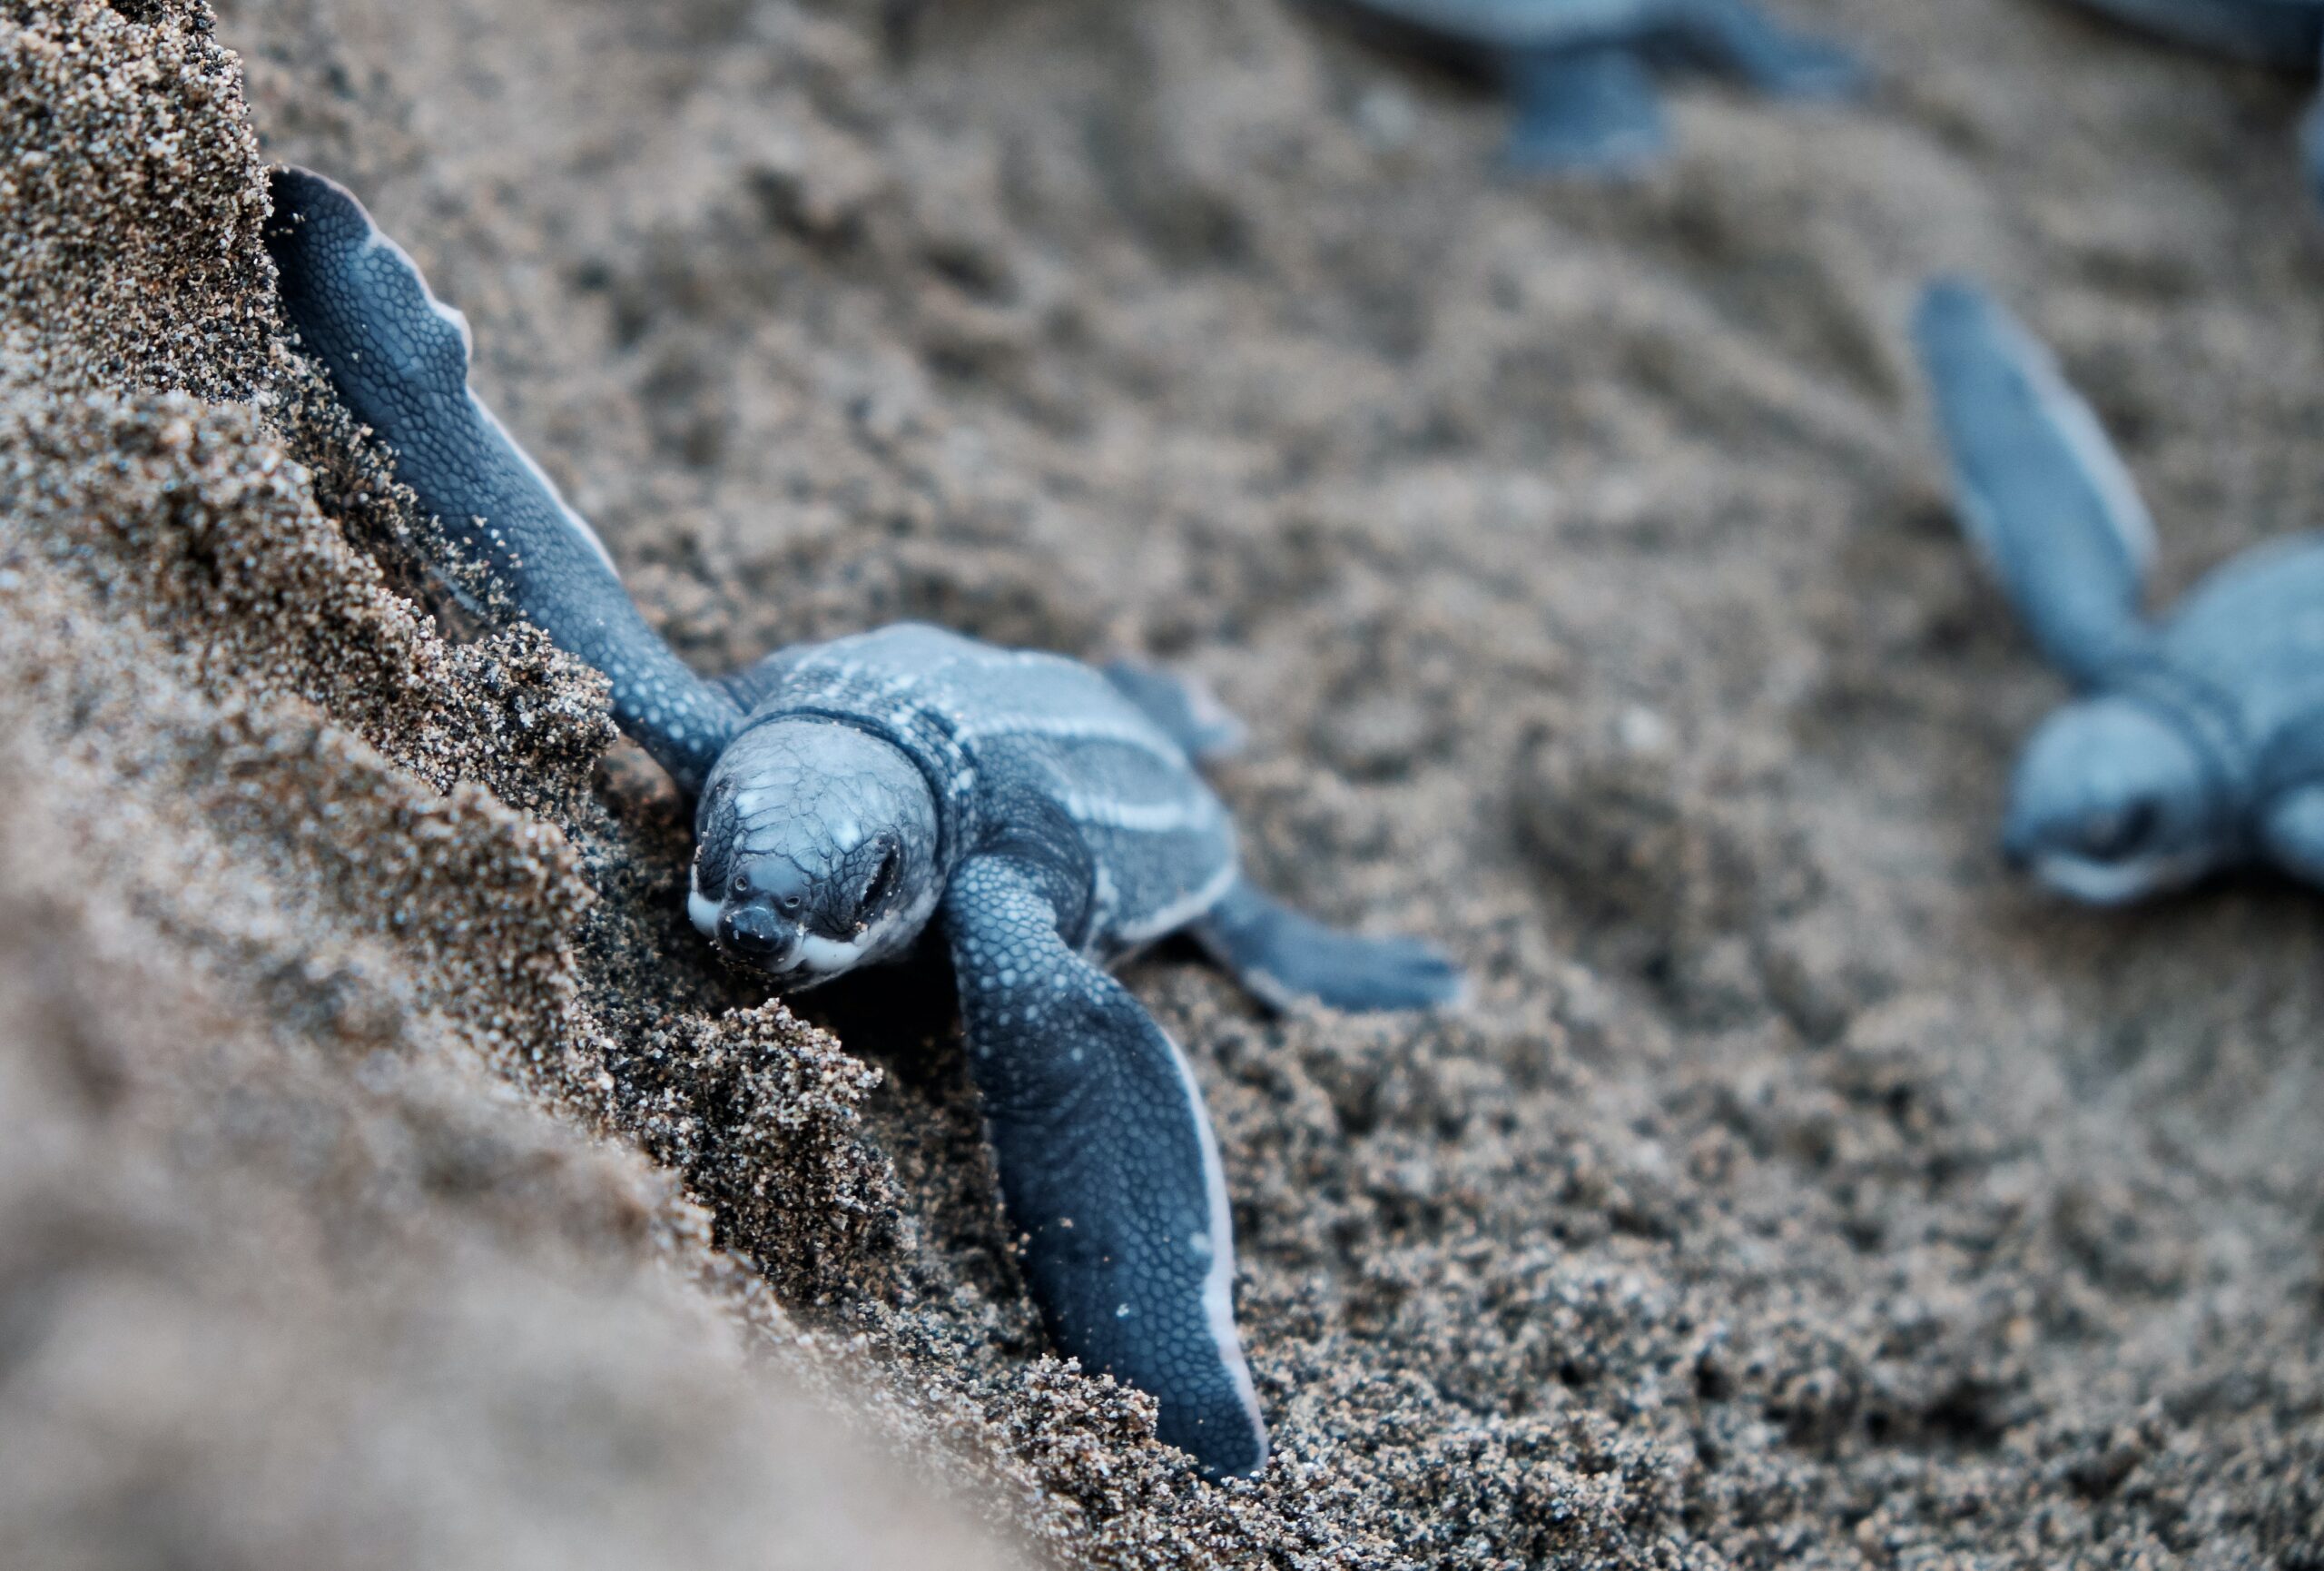 Report: All Seven Leatherback Sea Turtle Populations at High Extinction Risk